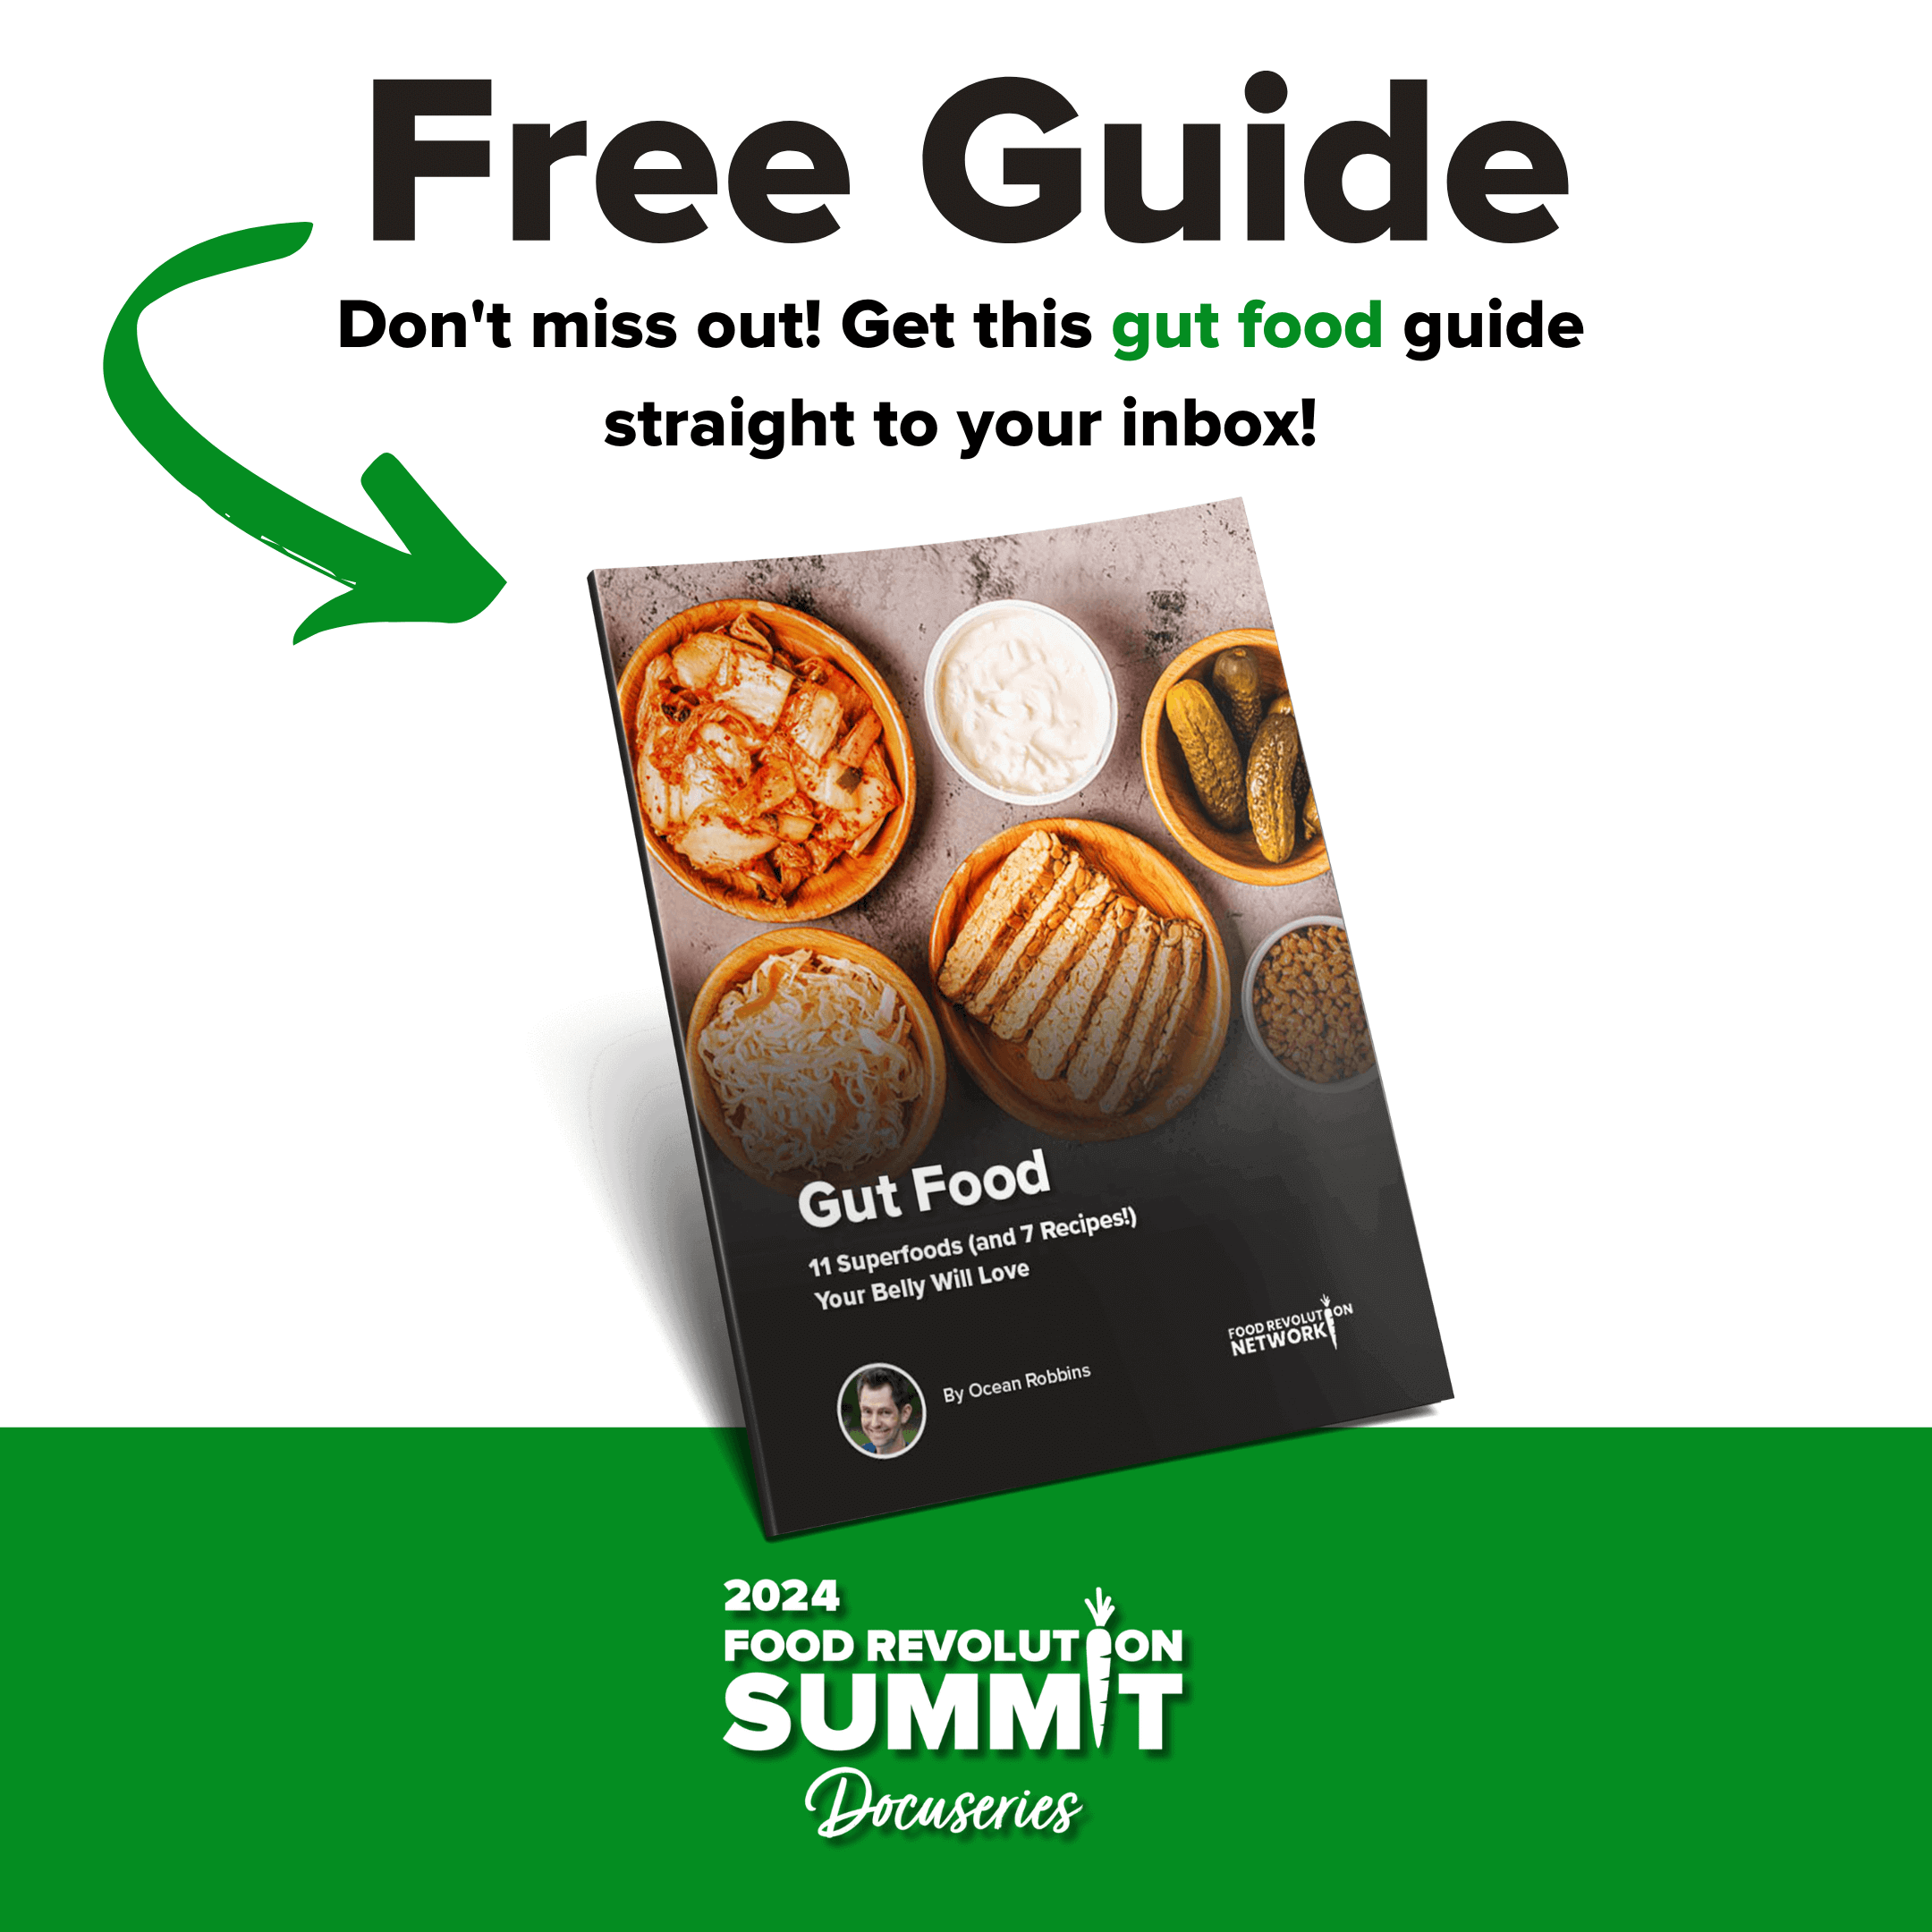 Free Guide Don't miss out! Get this gut food guide!